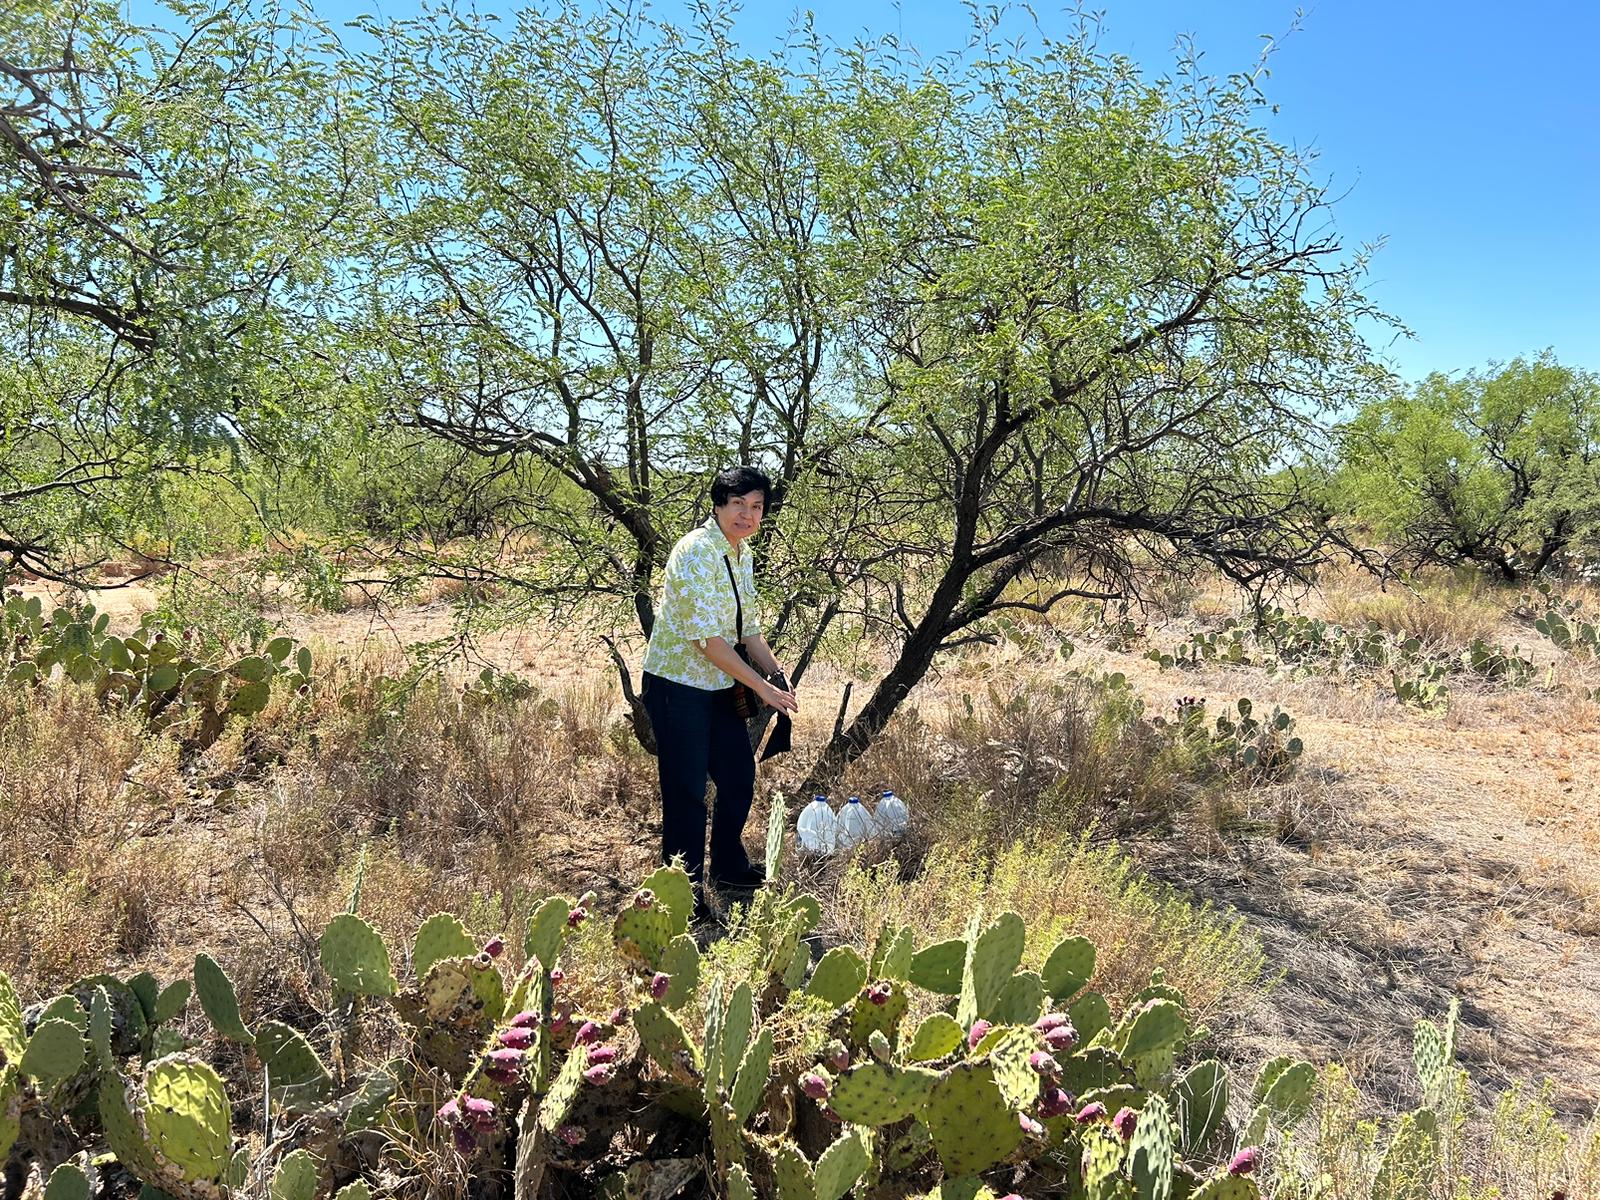 Sr. Oliva Olivares from the Missionary Guadalupanas of the Holy Spirit leaves water beneath a mesquite tree in the Sásabe community in the Arizona desert for migrants crossing the border in that area to drink. (Peter Tran) 